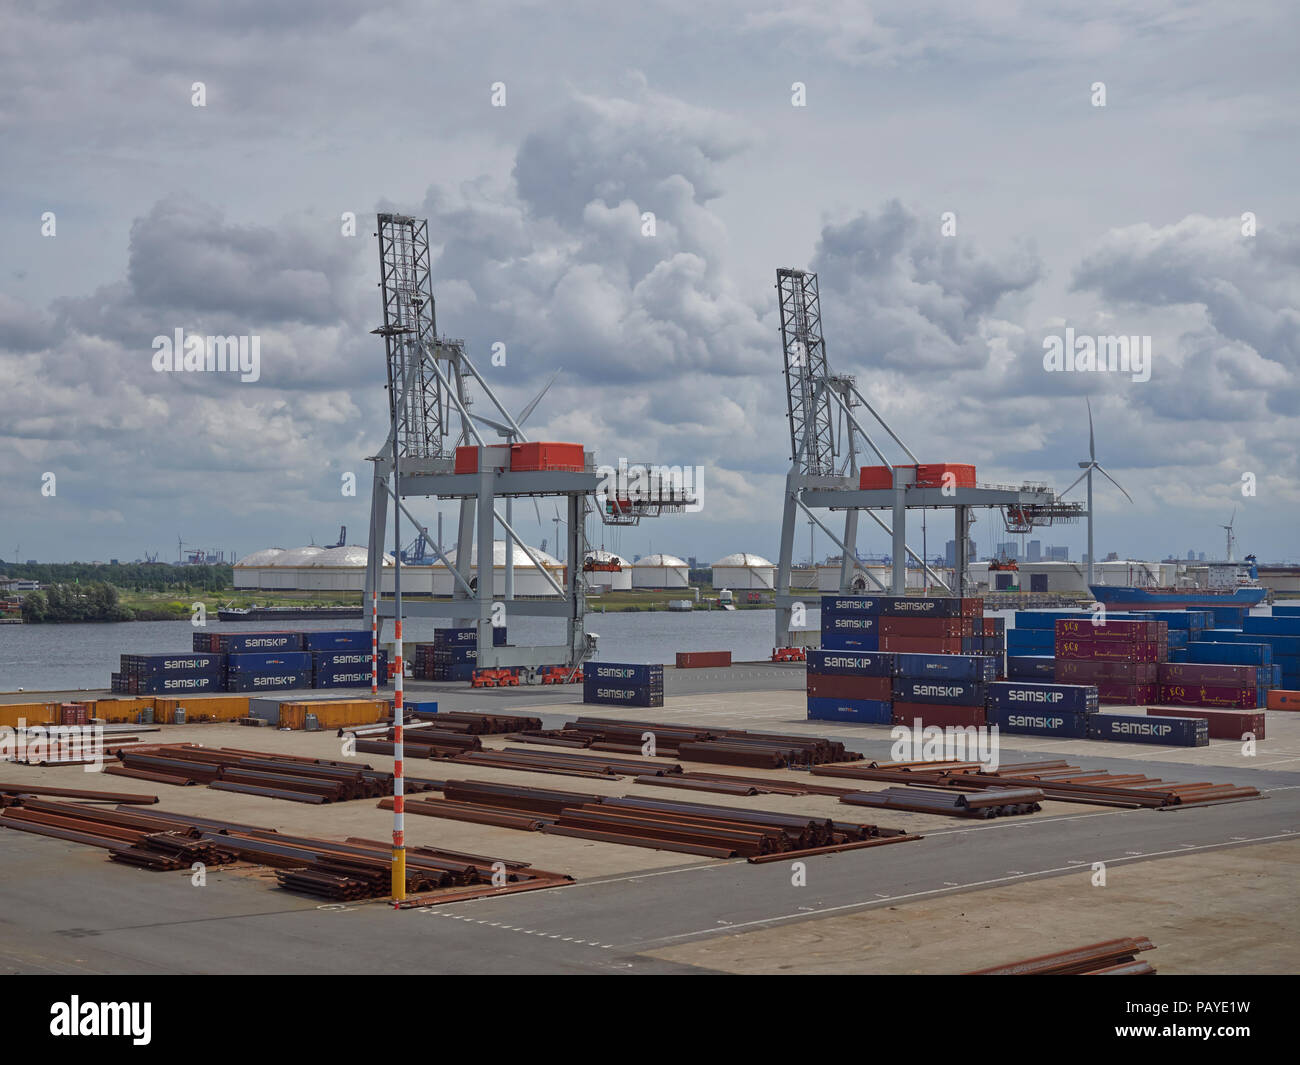 Two Large Container Cranes awaiting loading operations at the Container Terminal in Den Haag, Amsterdam, The Netherlands. Stock Photo